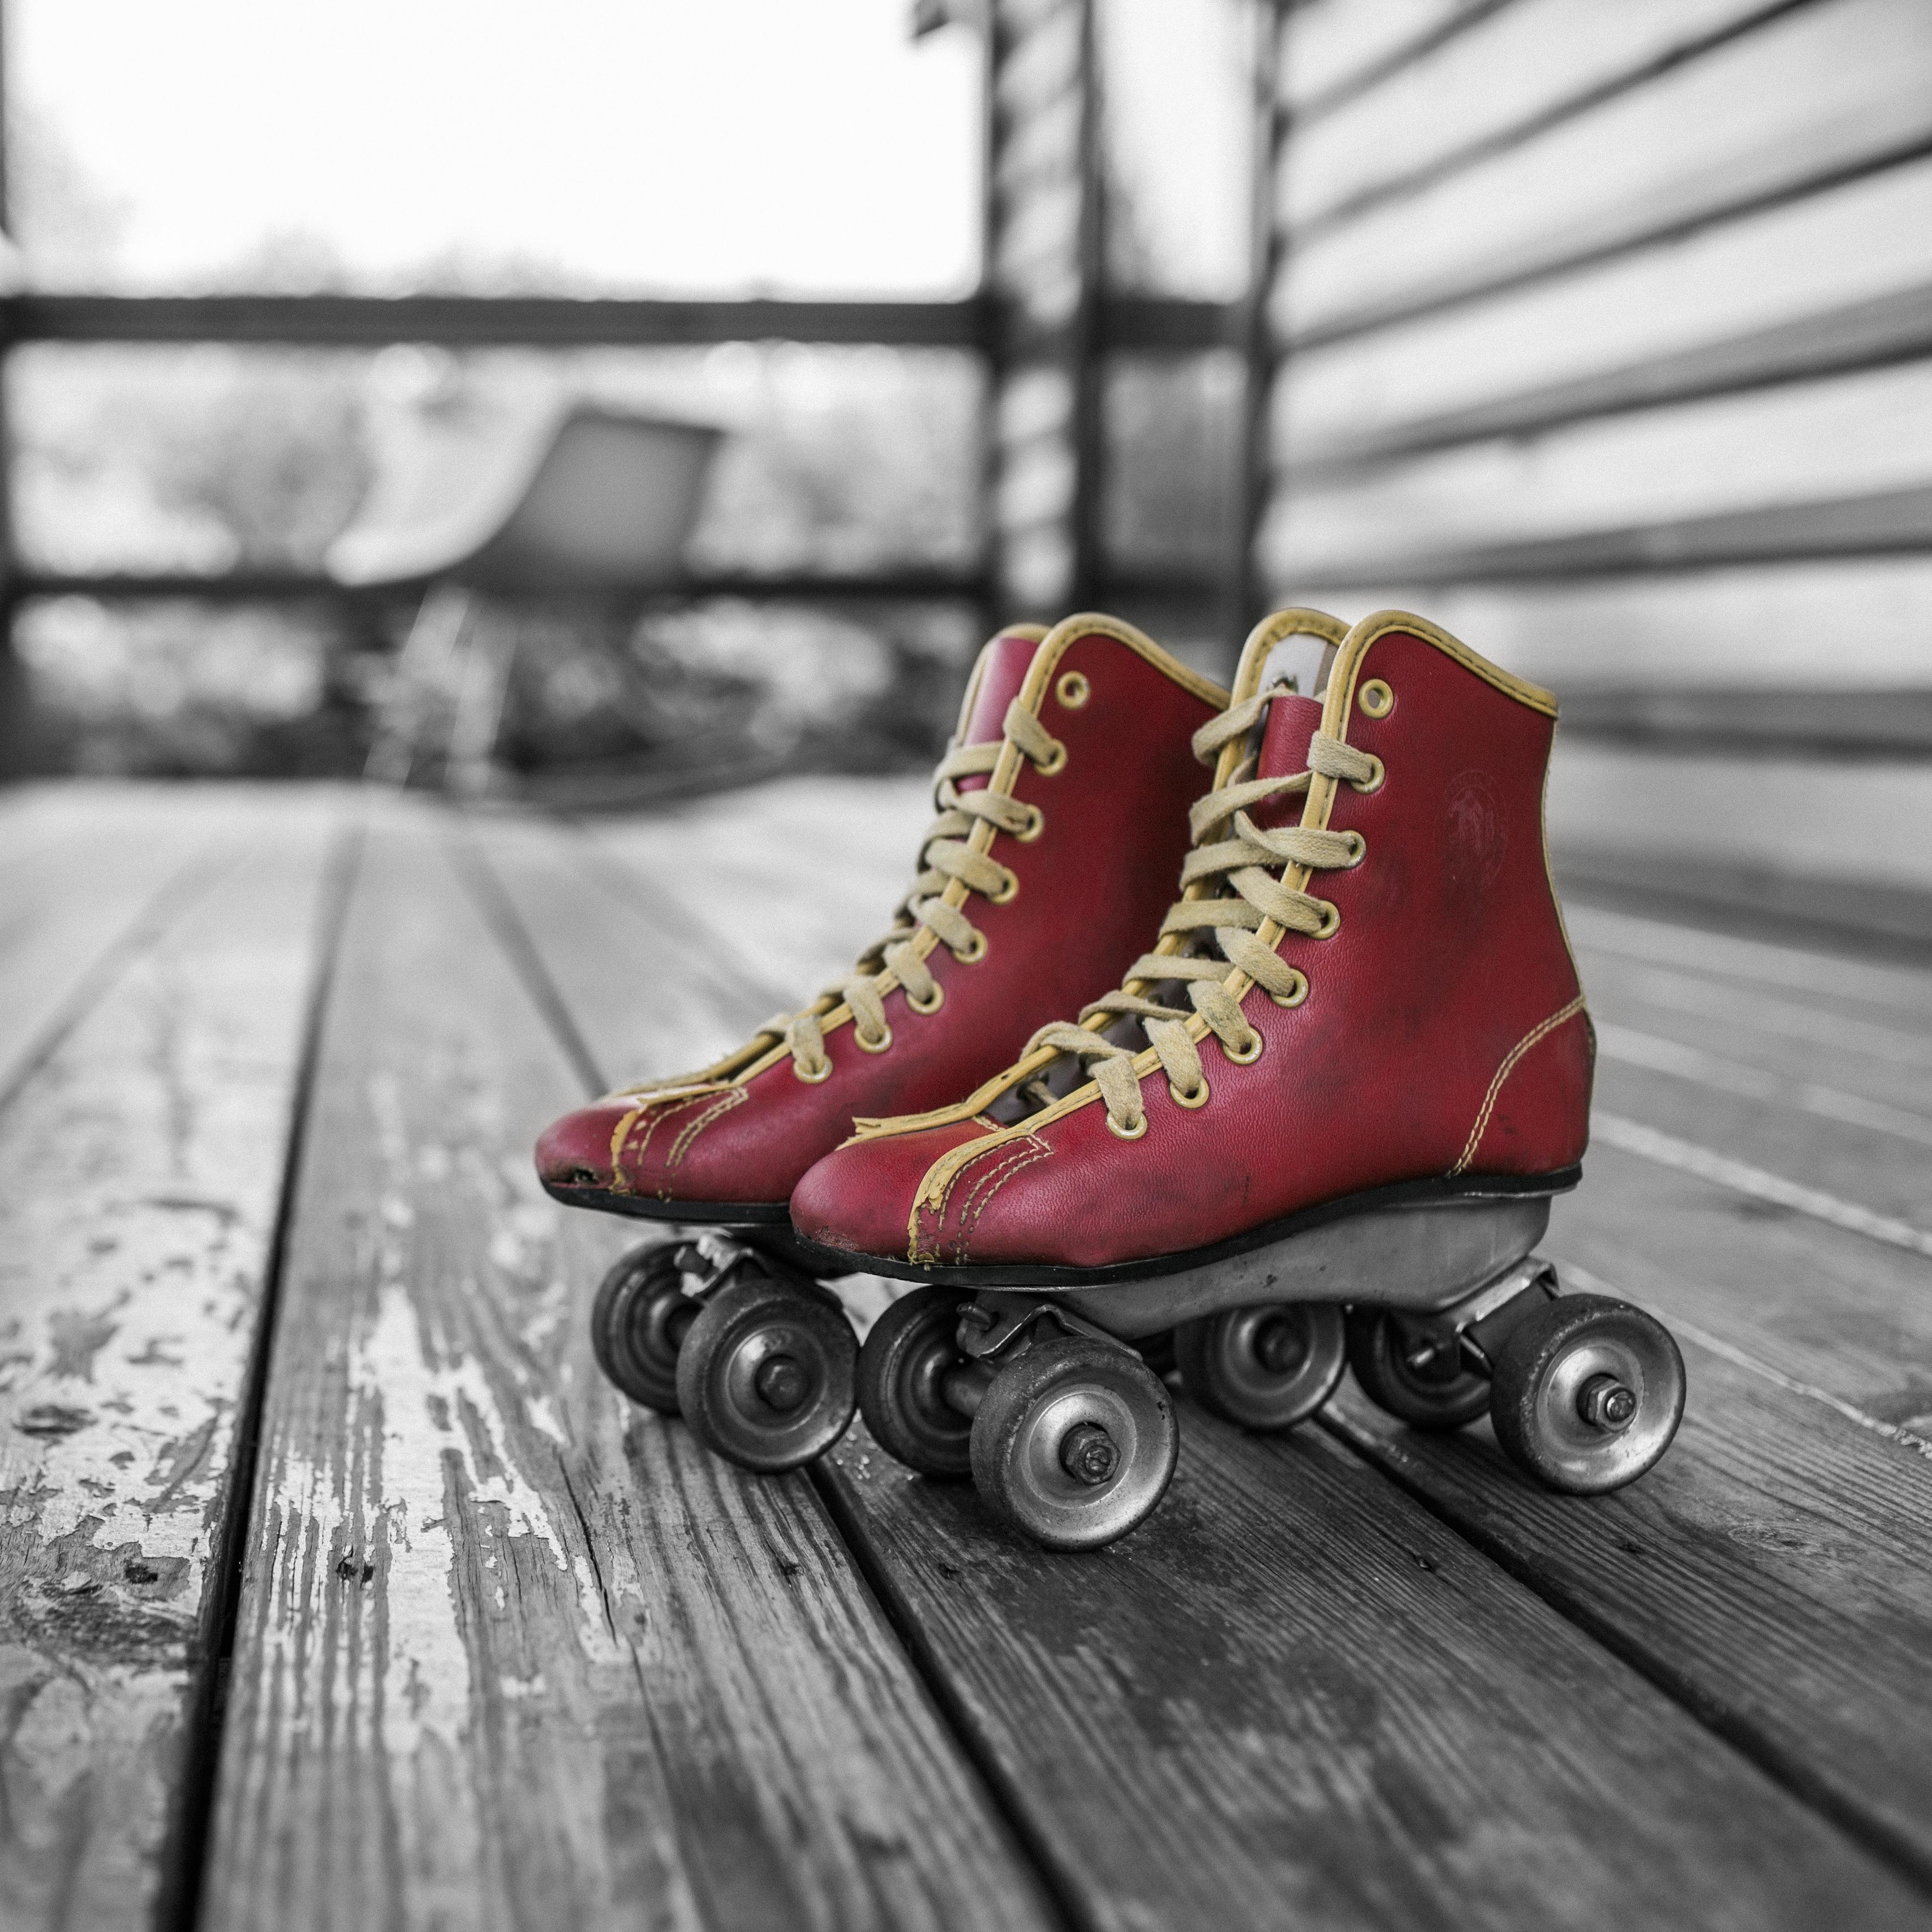 Download wallpaper 3415x3415 rollers, skates, retro, red ipad pro